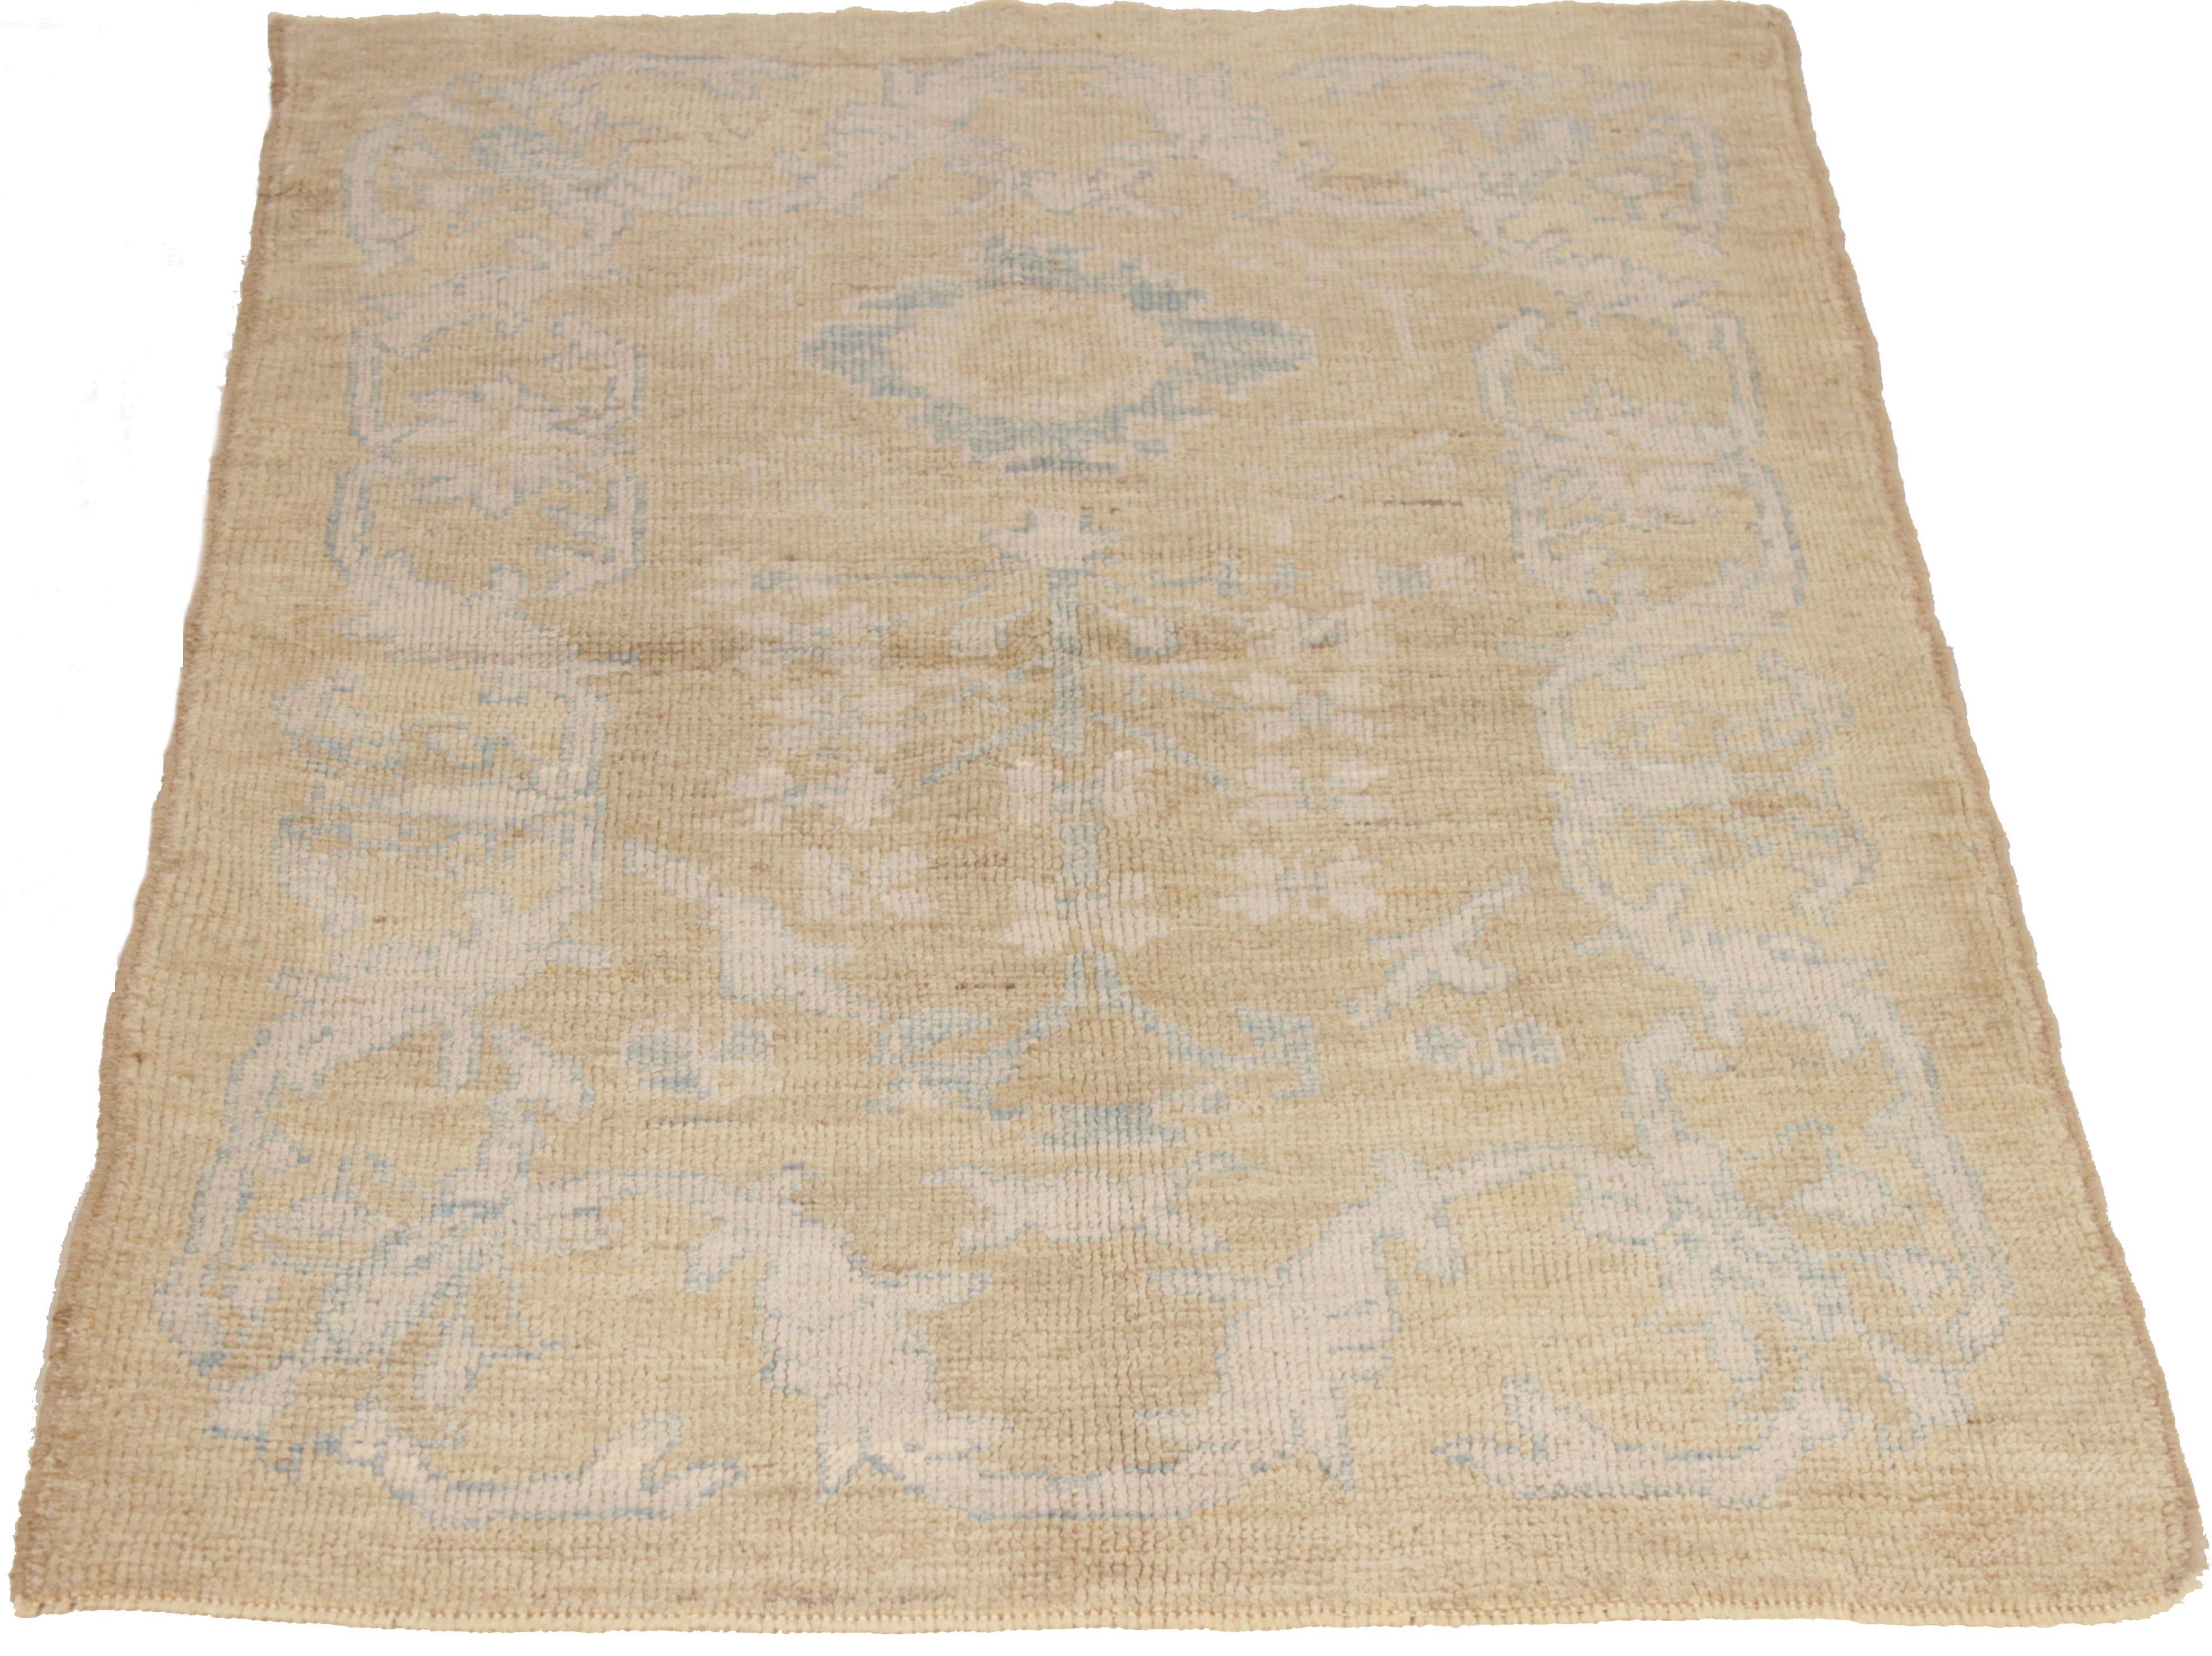 Contemporary Oushak Persian Rug with Ivory Floral Patterns  For Sale 3